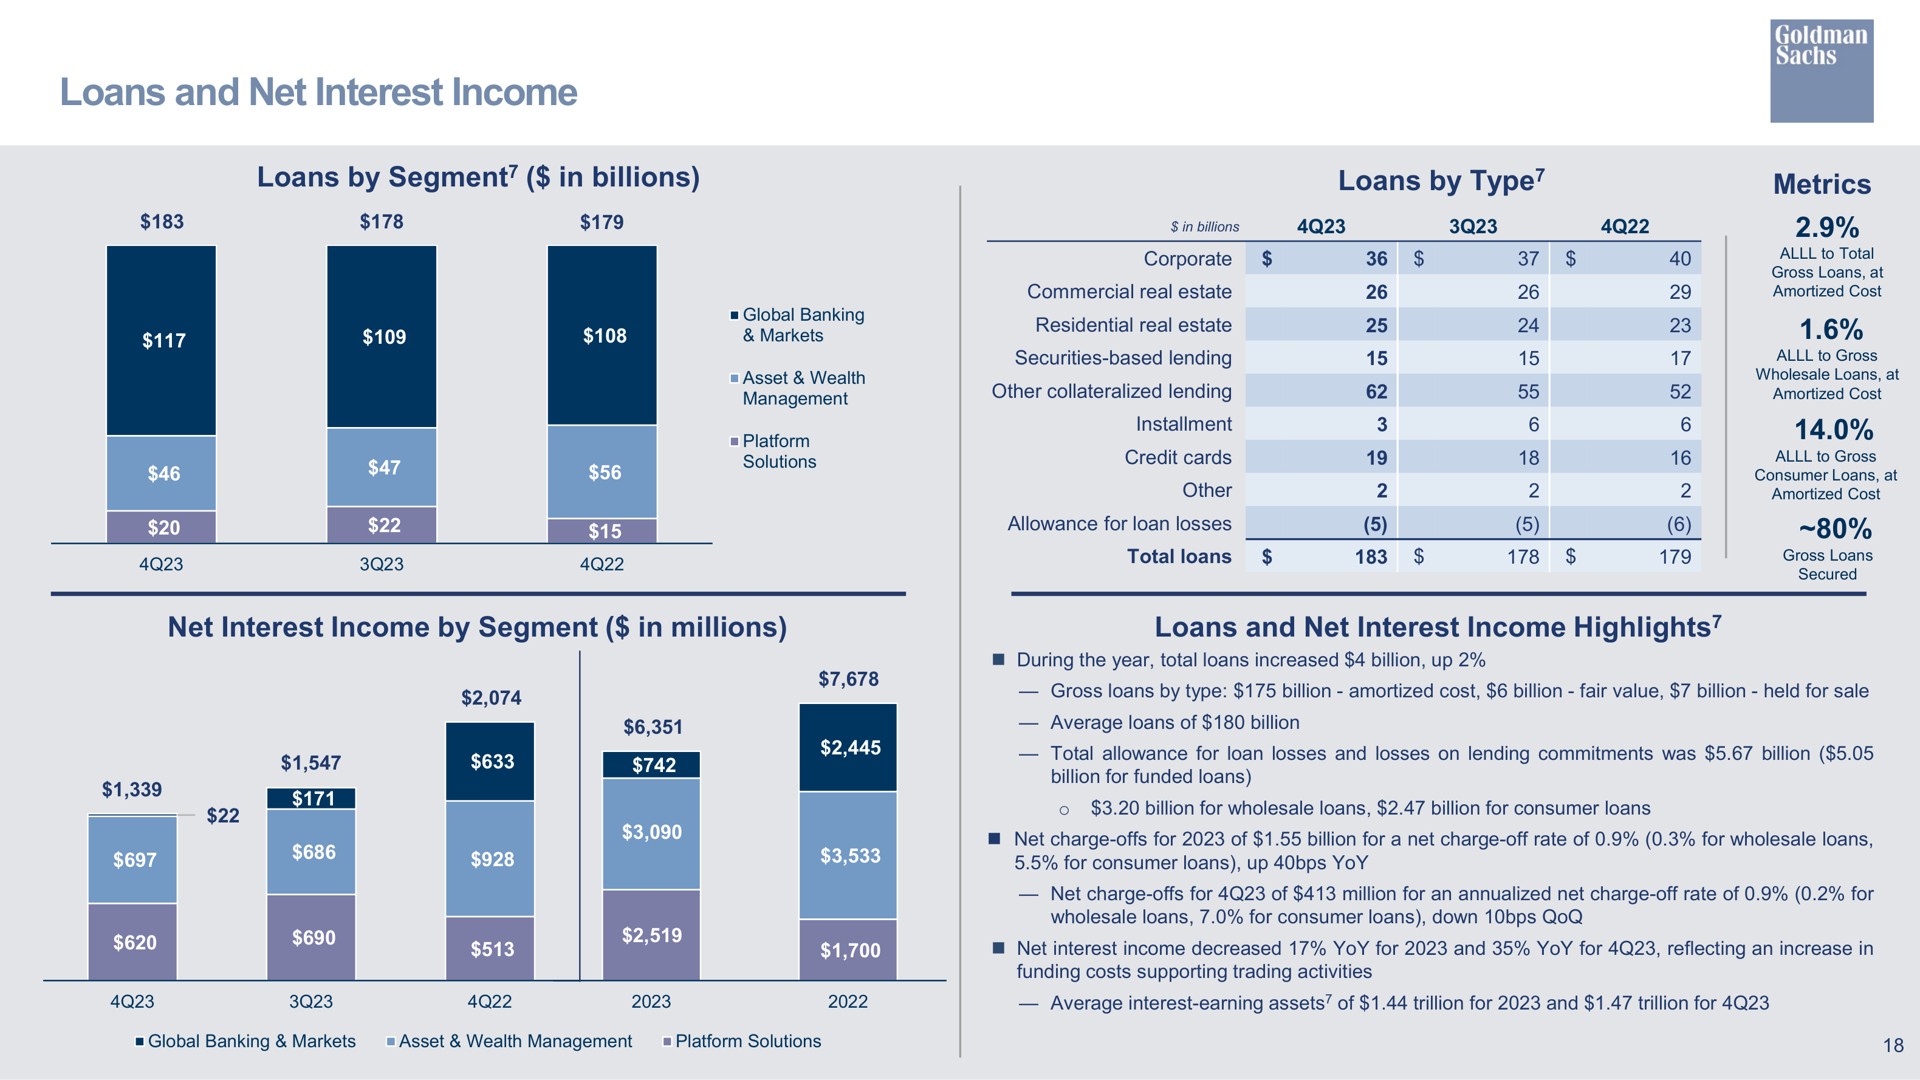 loans and net interest income loans by segment in billions net interest income by segment in millions loans by type metrics loans and net interest income highlights type | Goldman Sachs